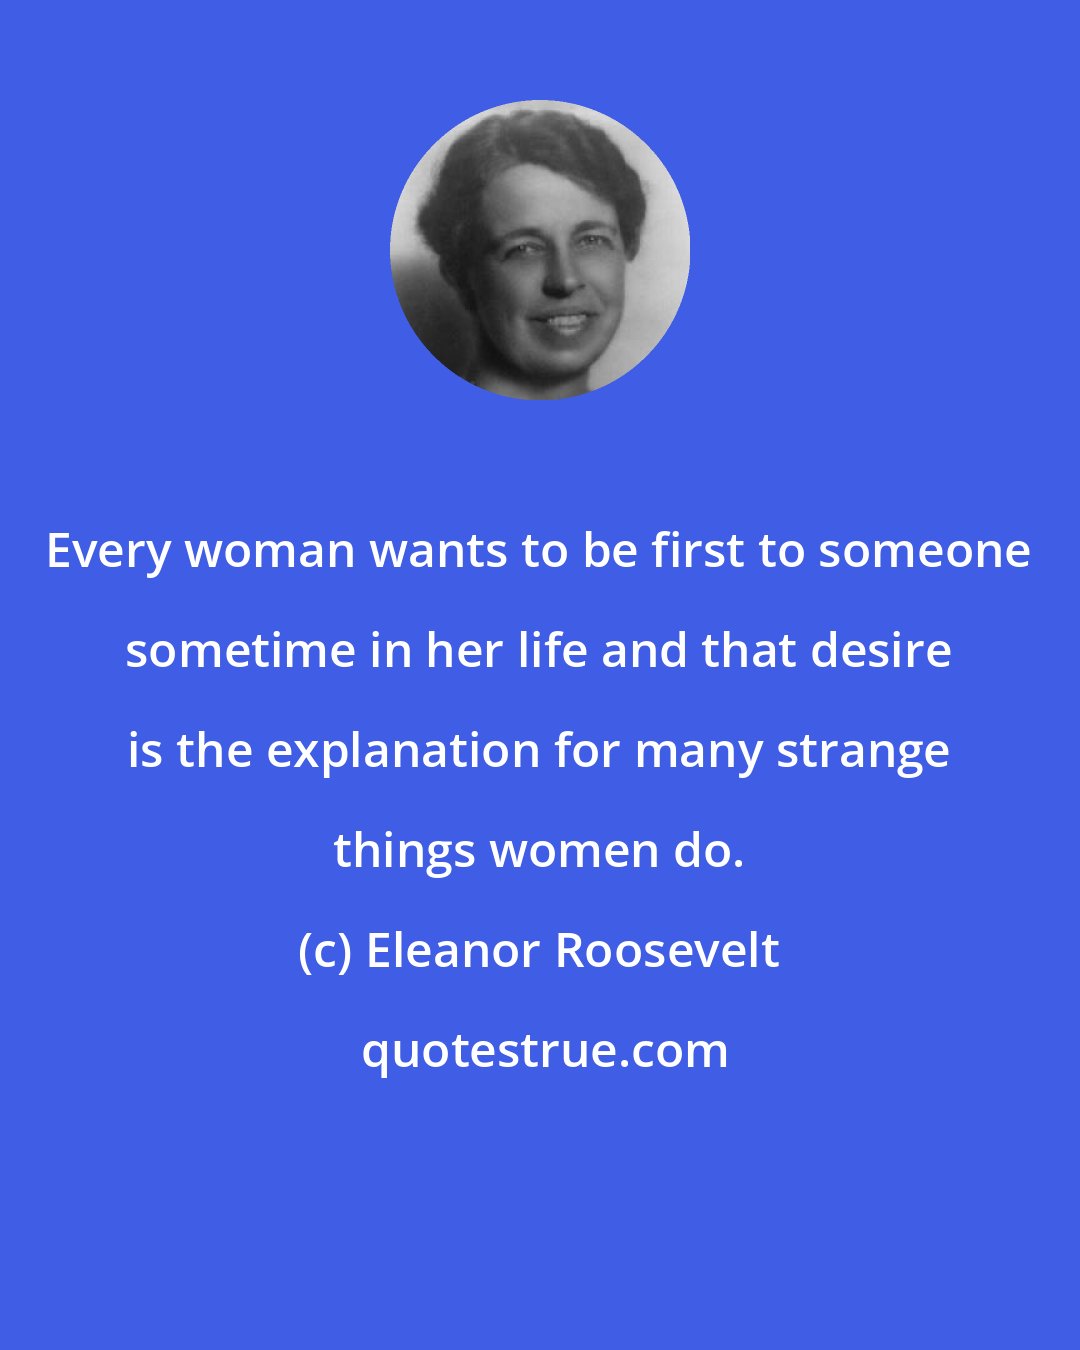 Eleanor Roosevelt: Every woman wants to be first to someone sometime in her life and that desire is the explanation for many strange things women do.